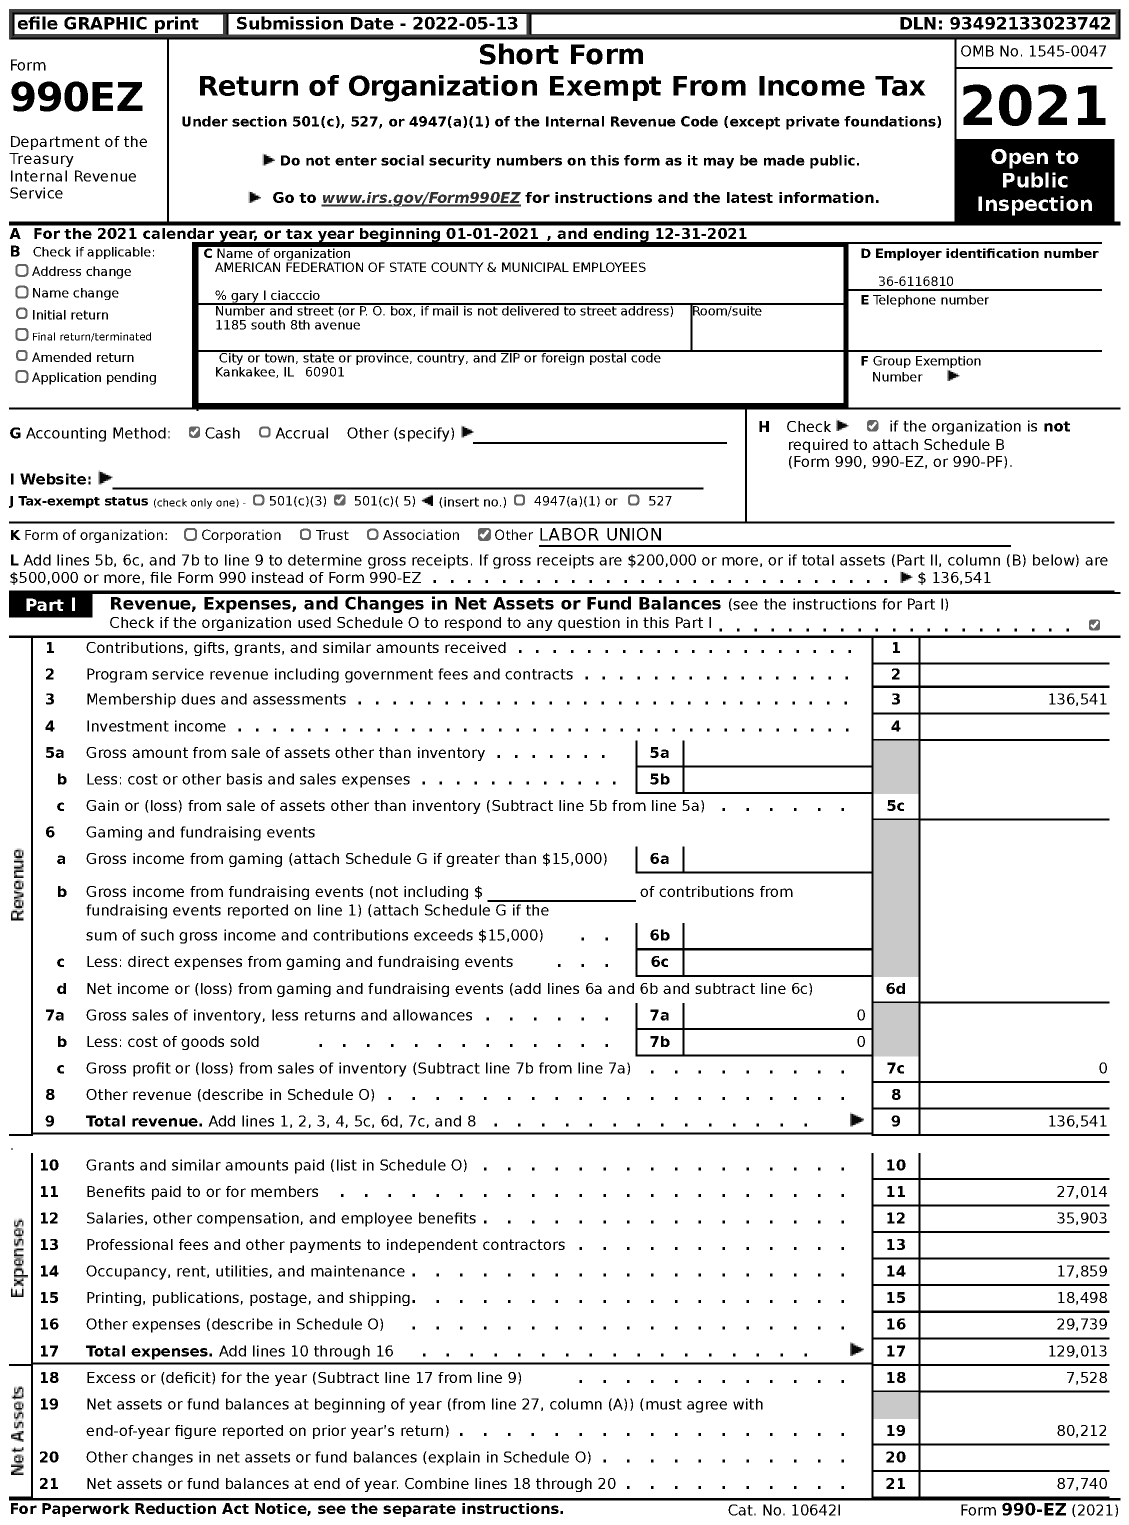 Image of first page of 2021 Form 990EZ for American Federation of State County & Municipal Employees - L0029il Il St Emps Kankakee